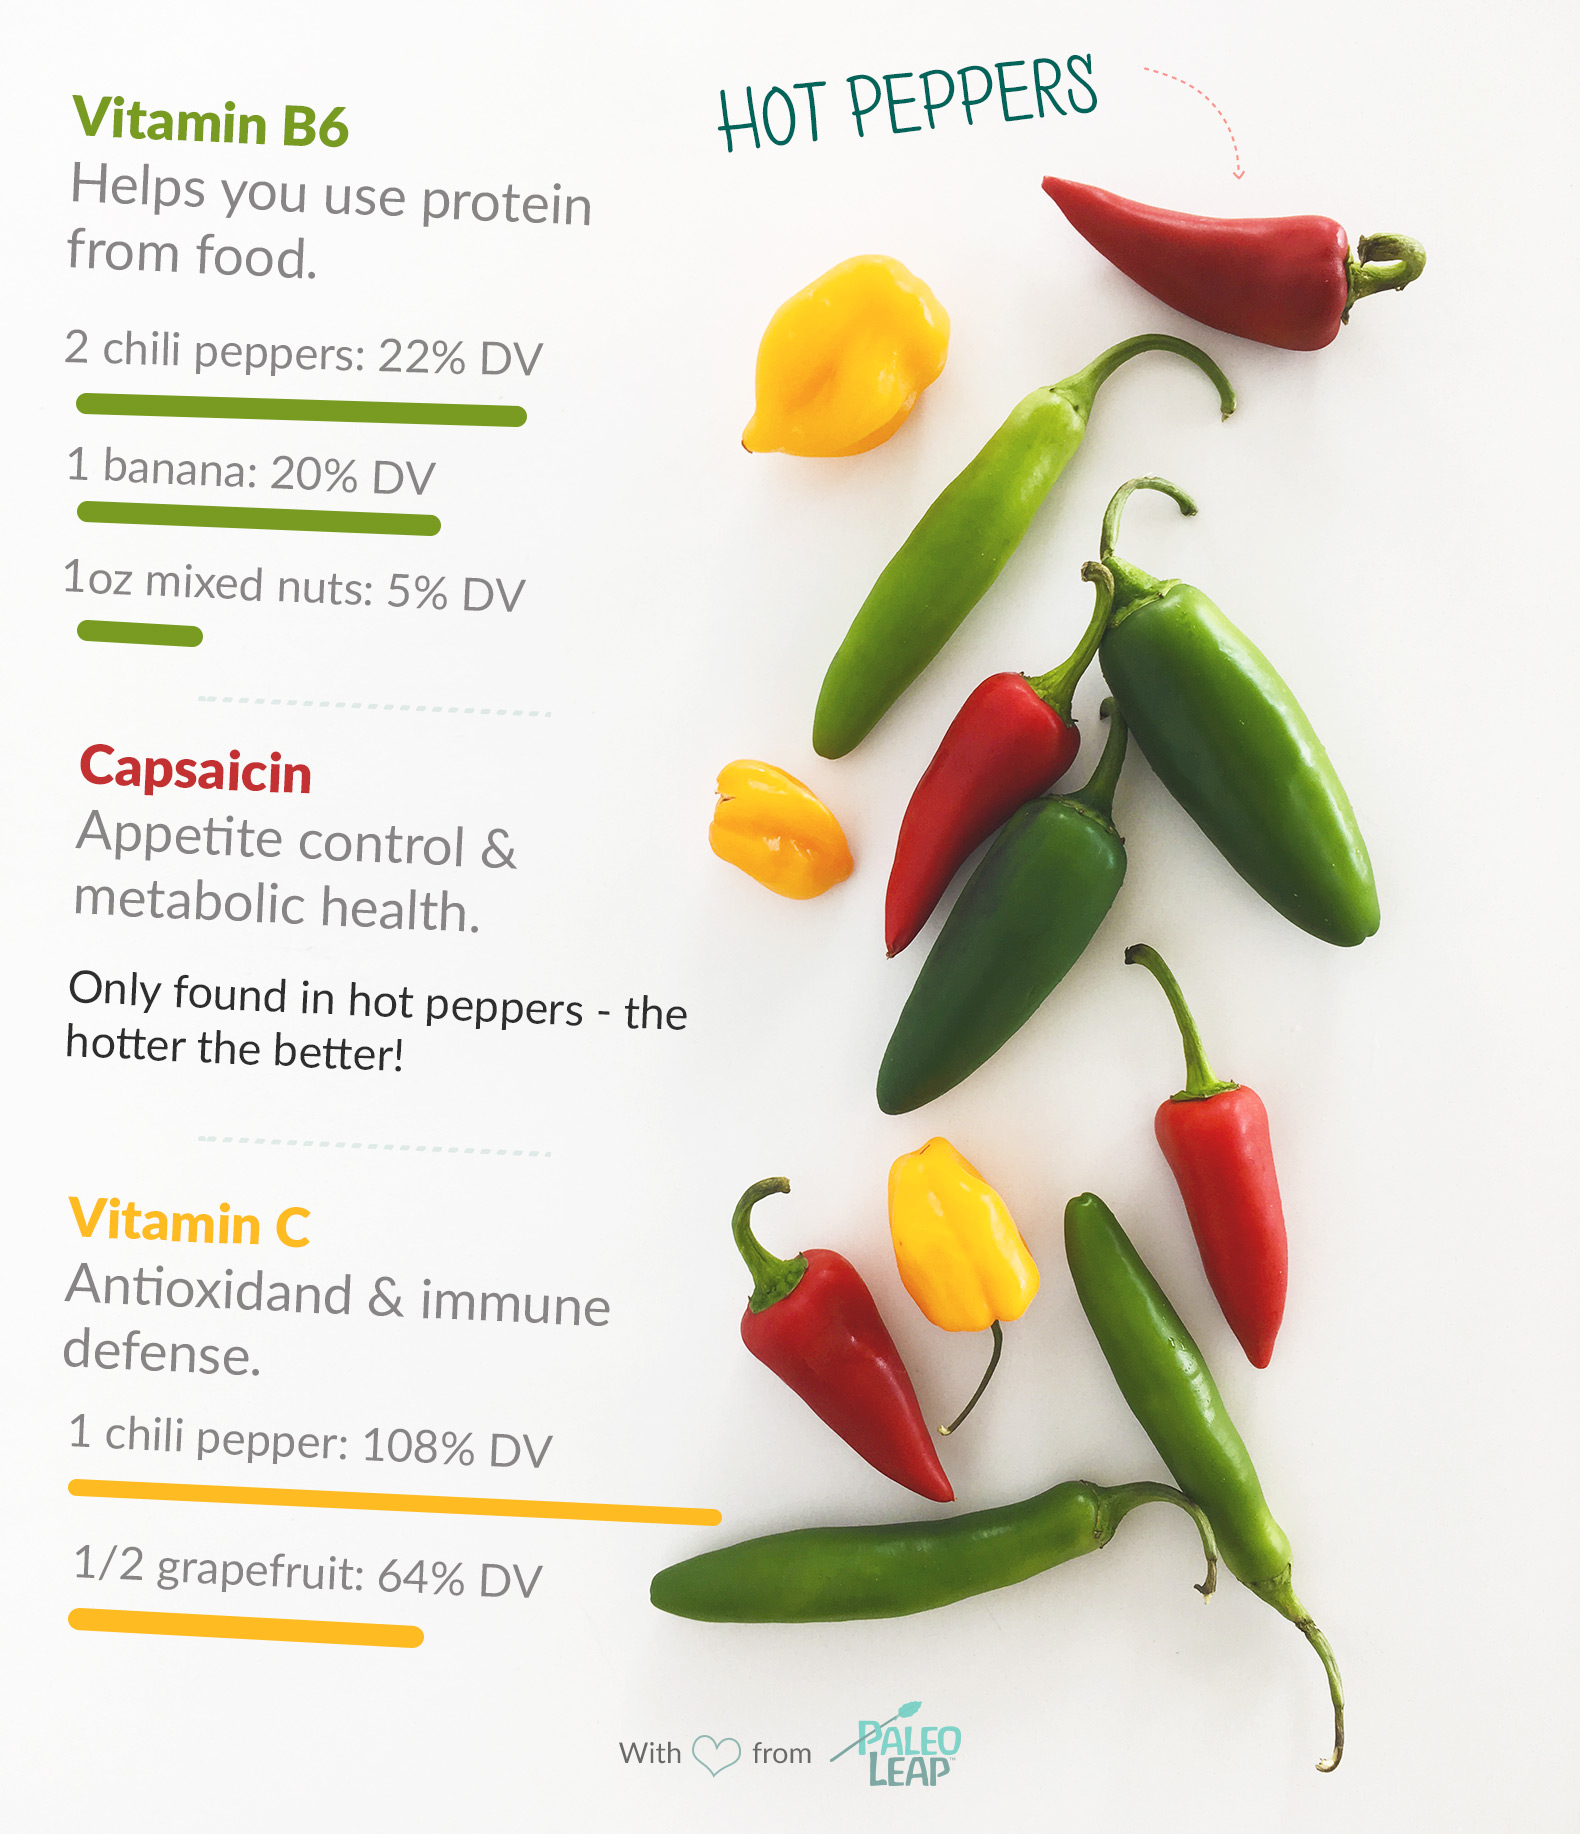 Paleo Foods: Chili Peppers | Paleo Leap